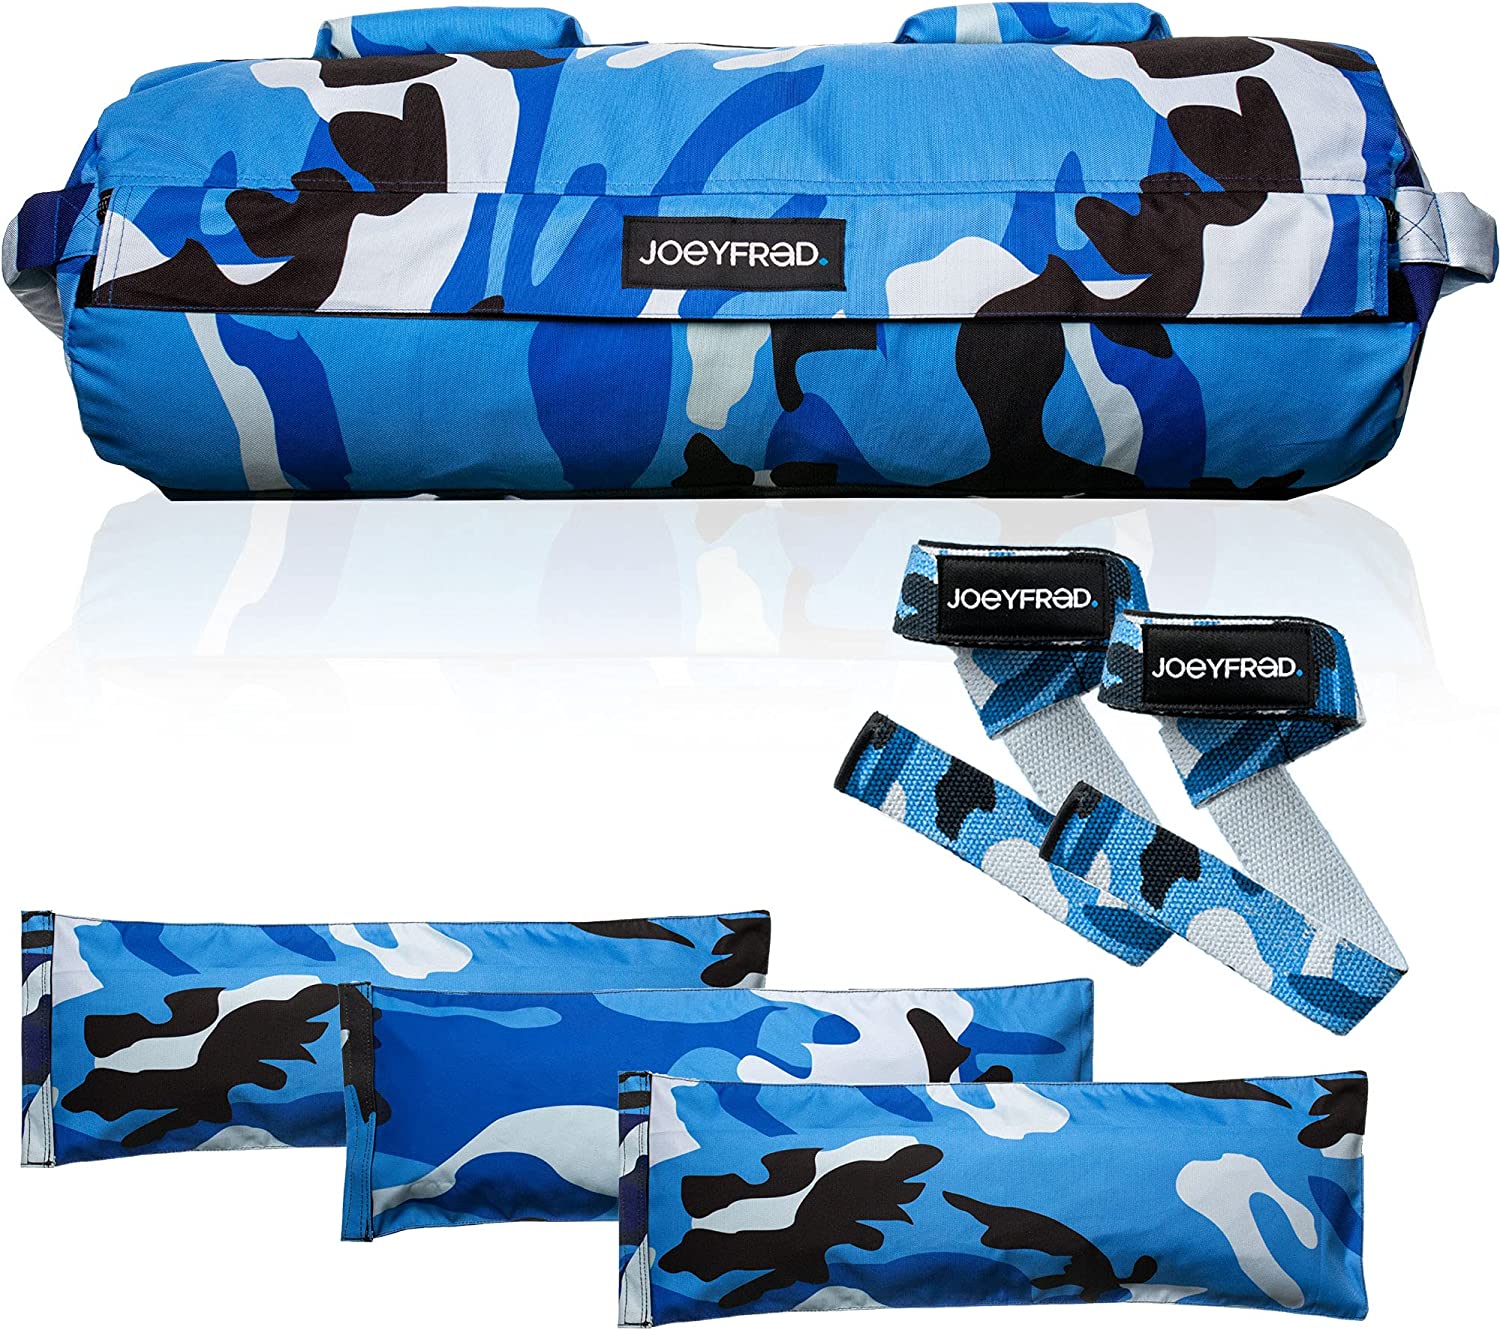 Joeyfrad Sandbags for Fitness with Handles - Heavy Duty Adjustable Weighted 10 to 60lbs Filler Bags for Workout, Great for Military Tactical Training, Cross Training, and Crossfit - Blue Camo